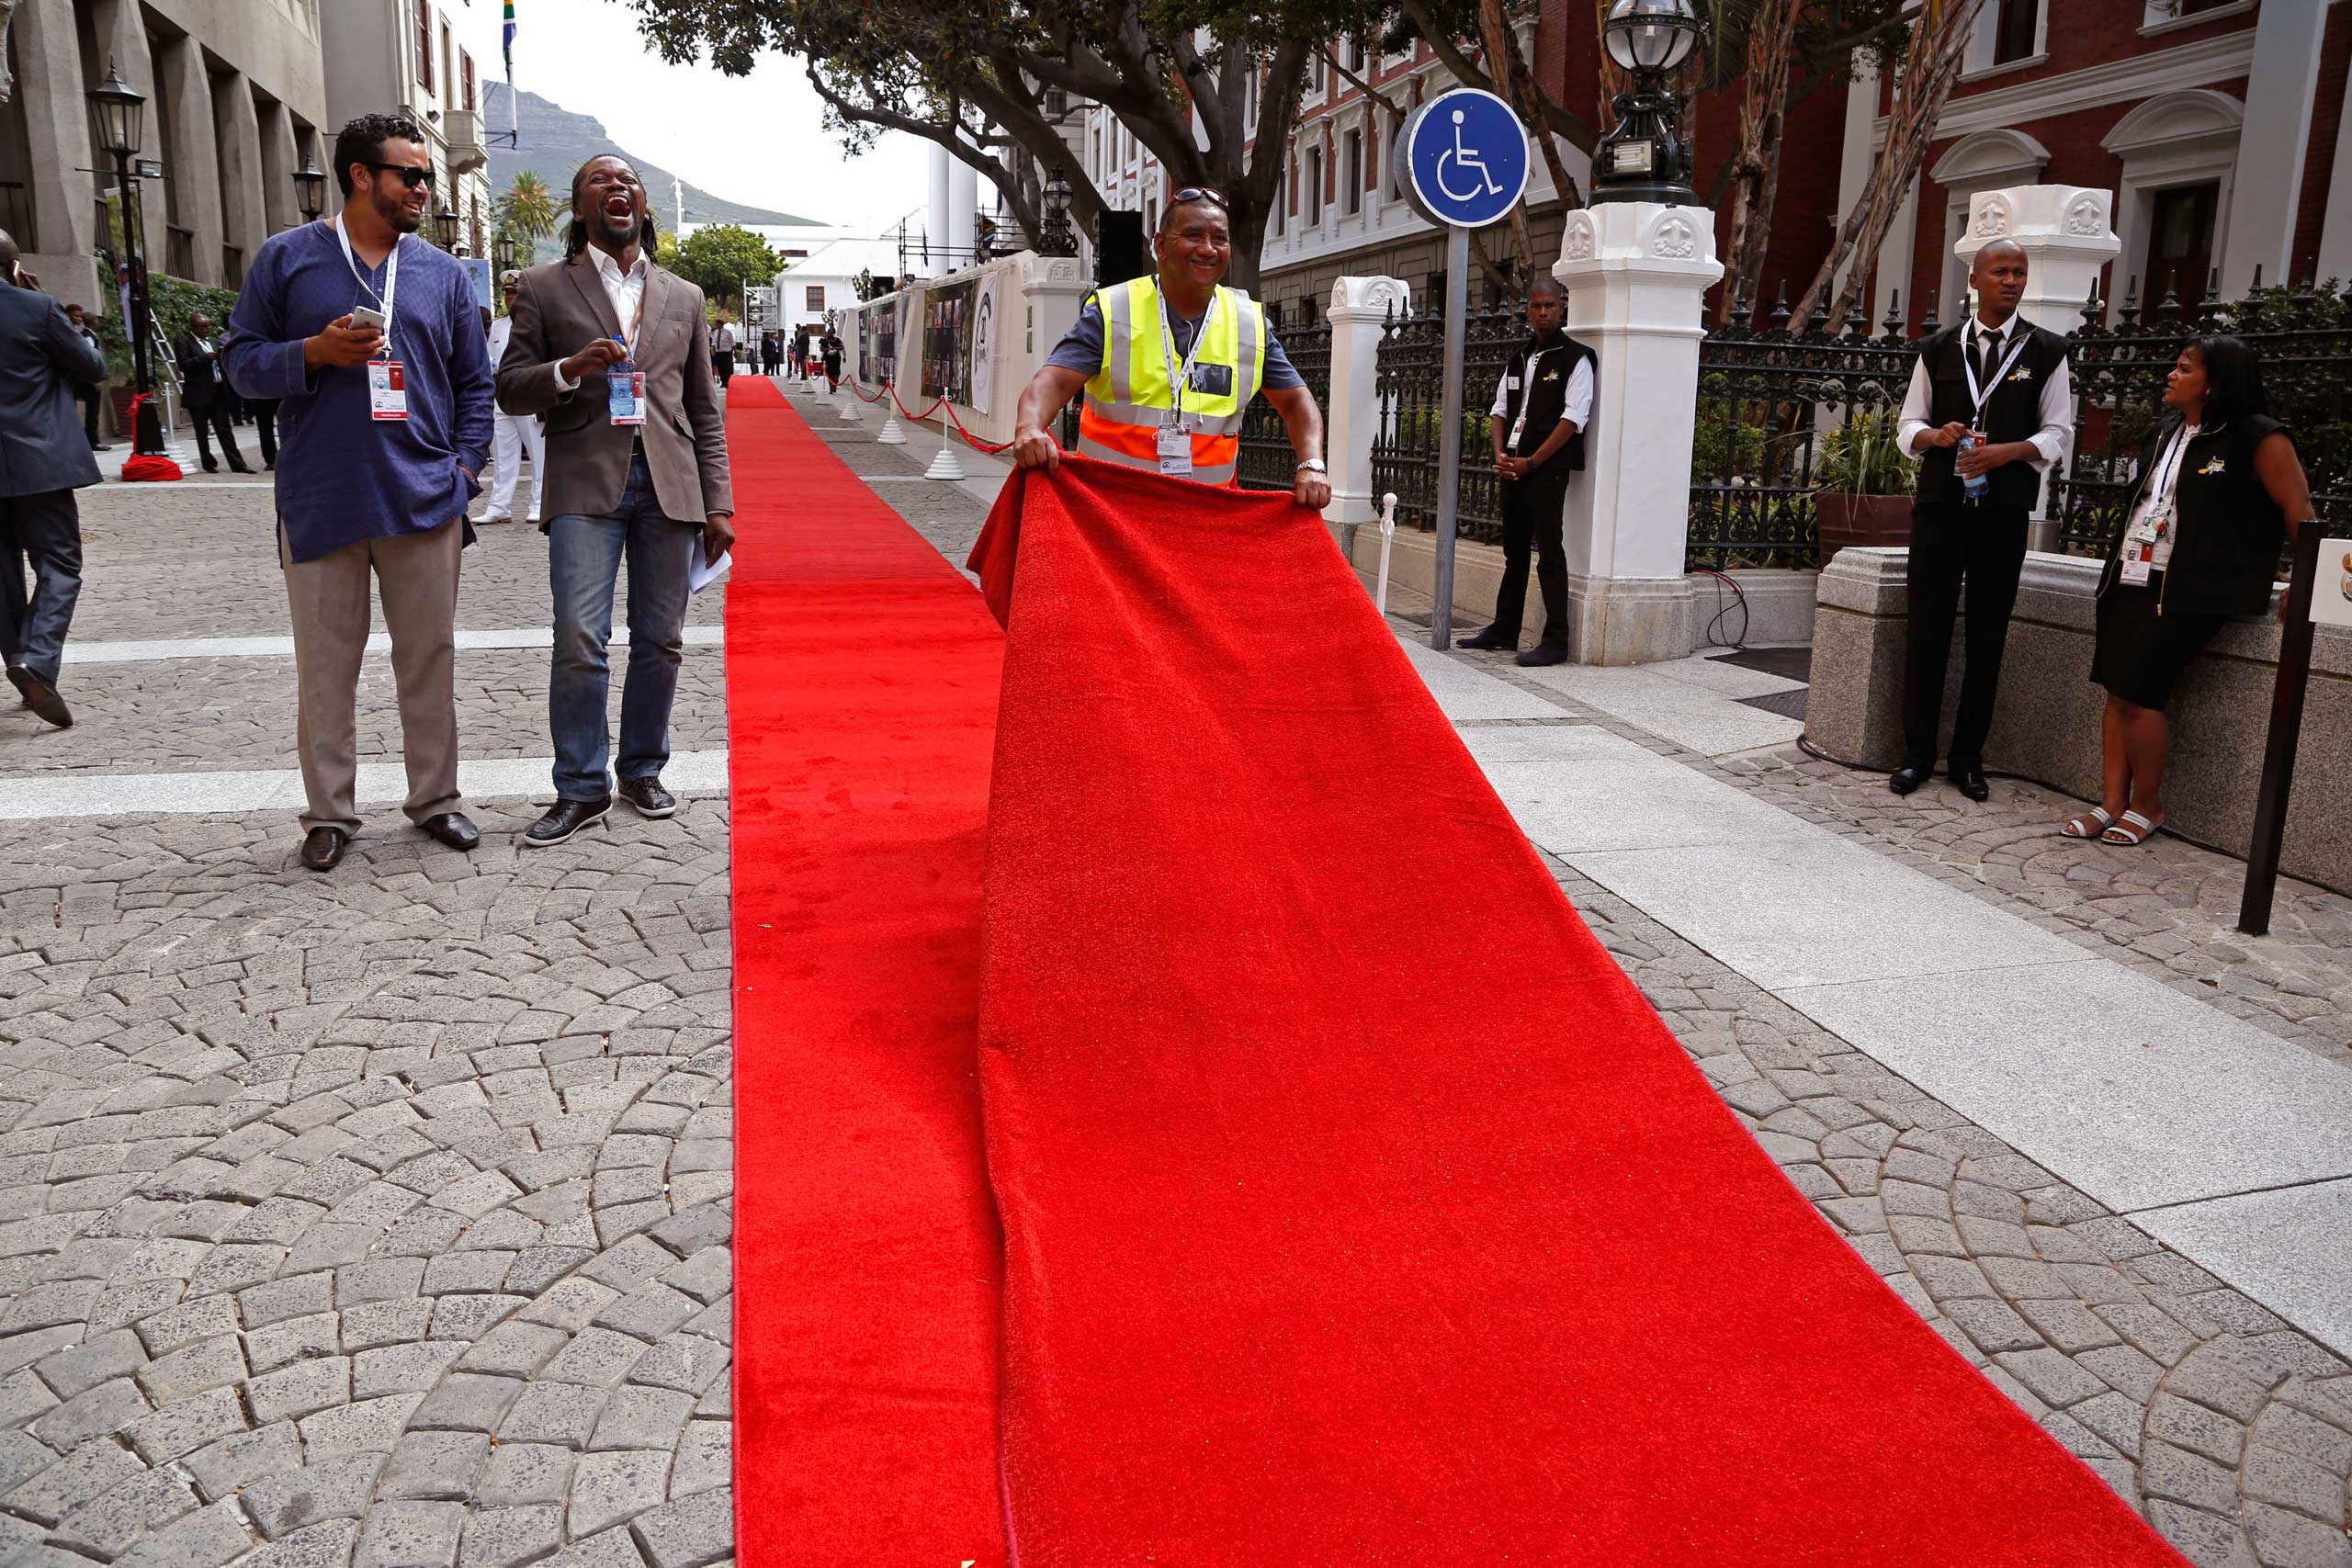 The red carpet is laid out at Parliament before the start of the official opening session in Cape Town, South Africa, Feb. 12, 2015. (Schalk van Zuydam—AP)